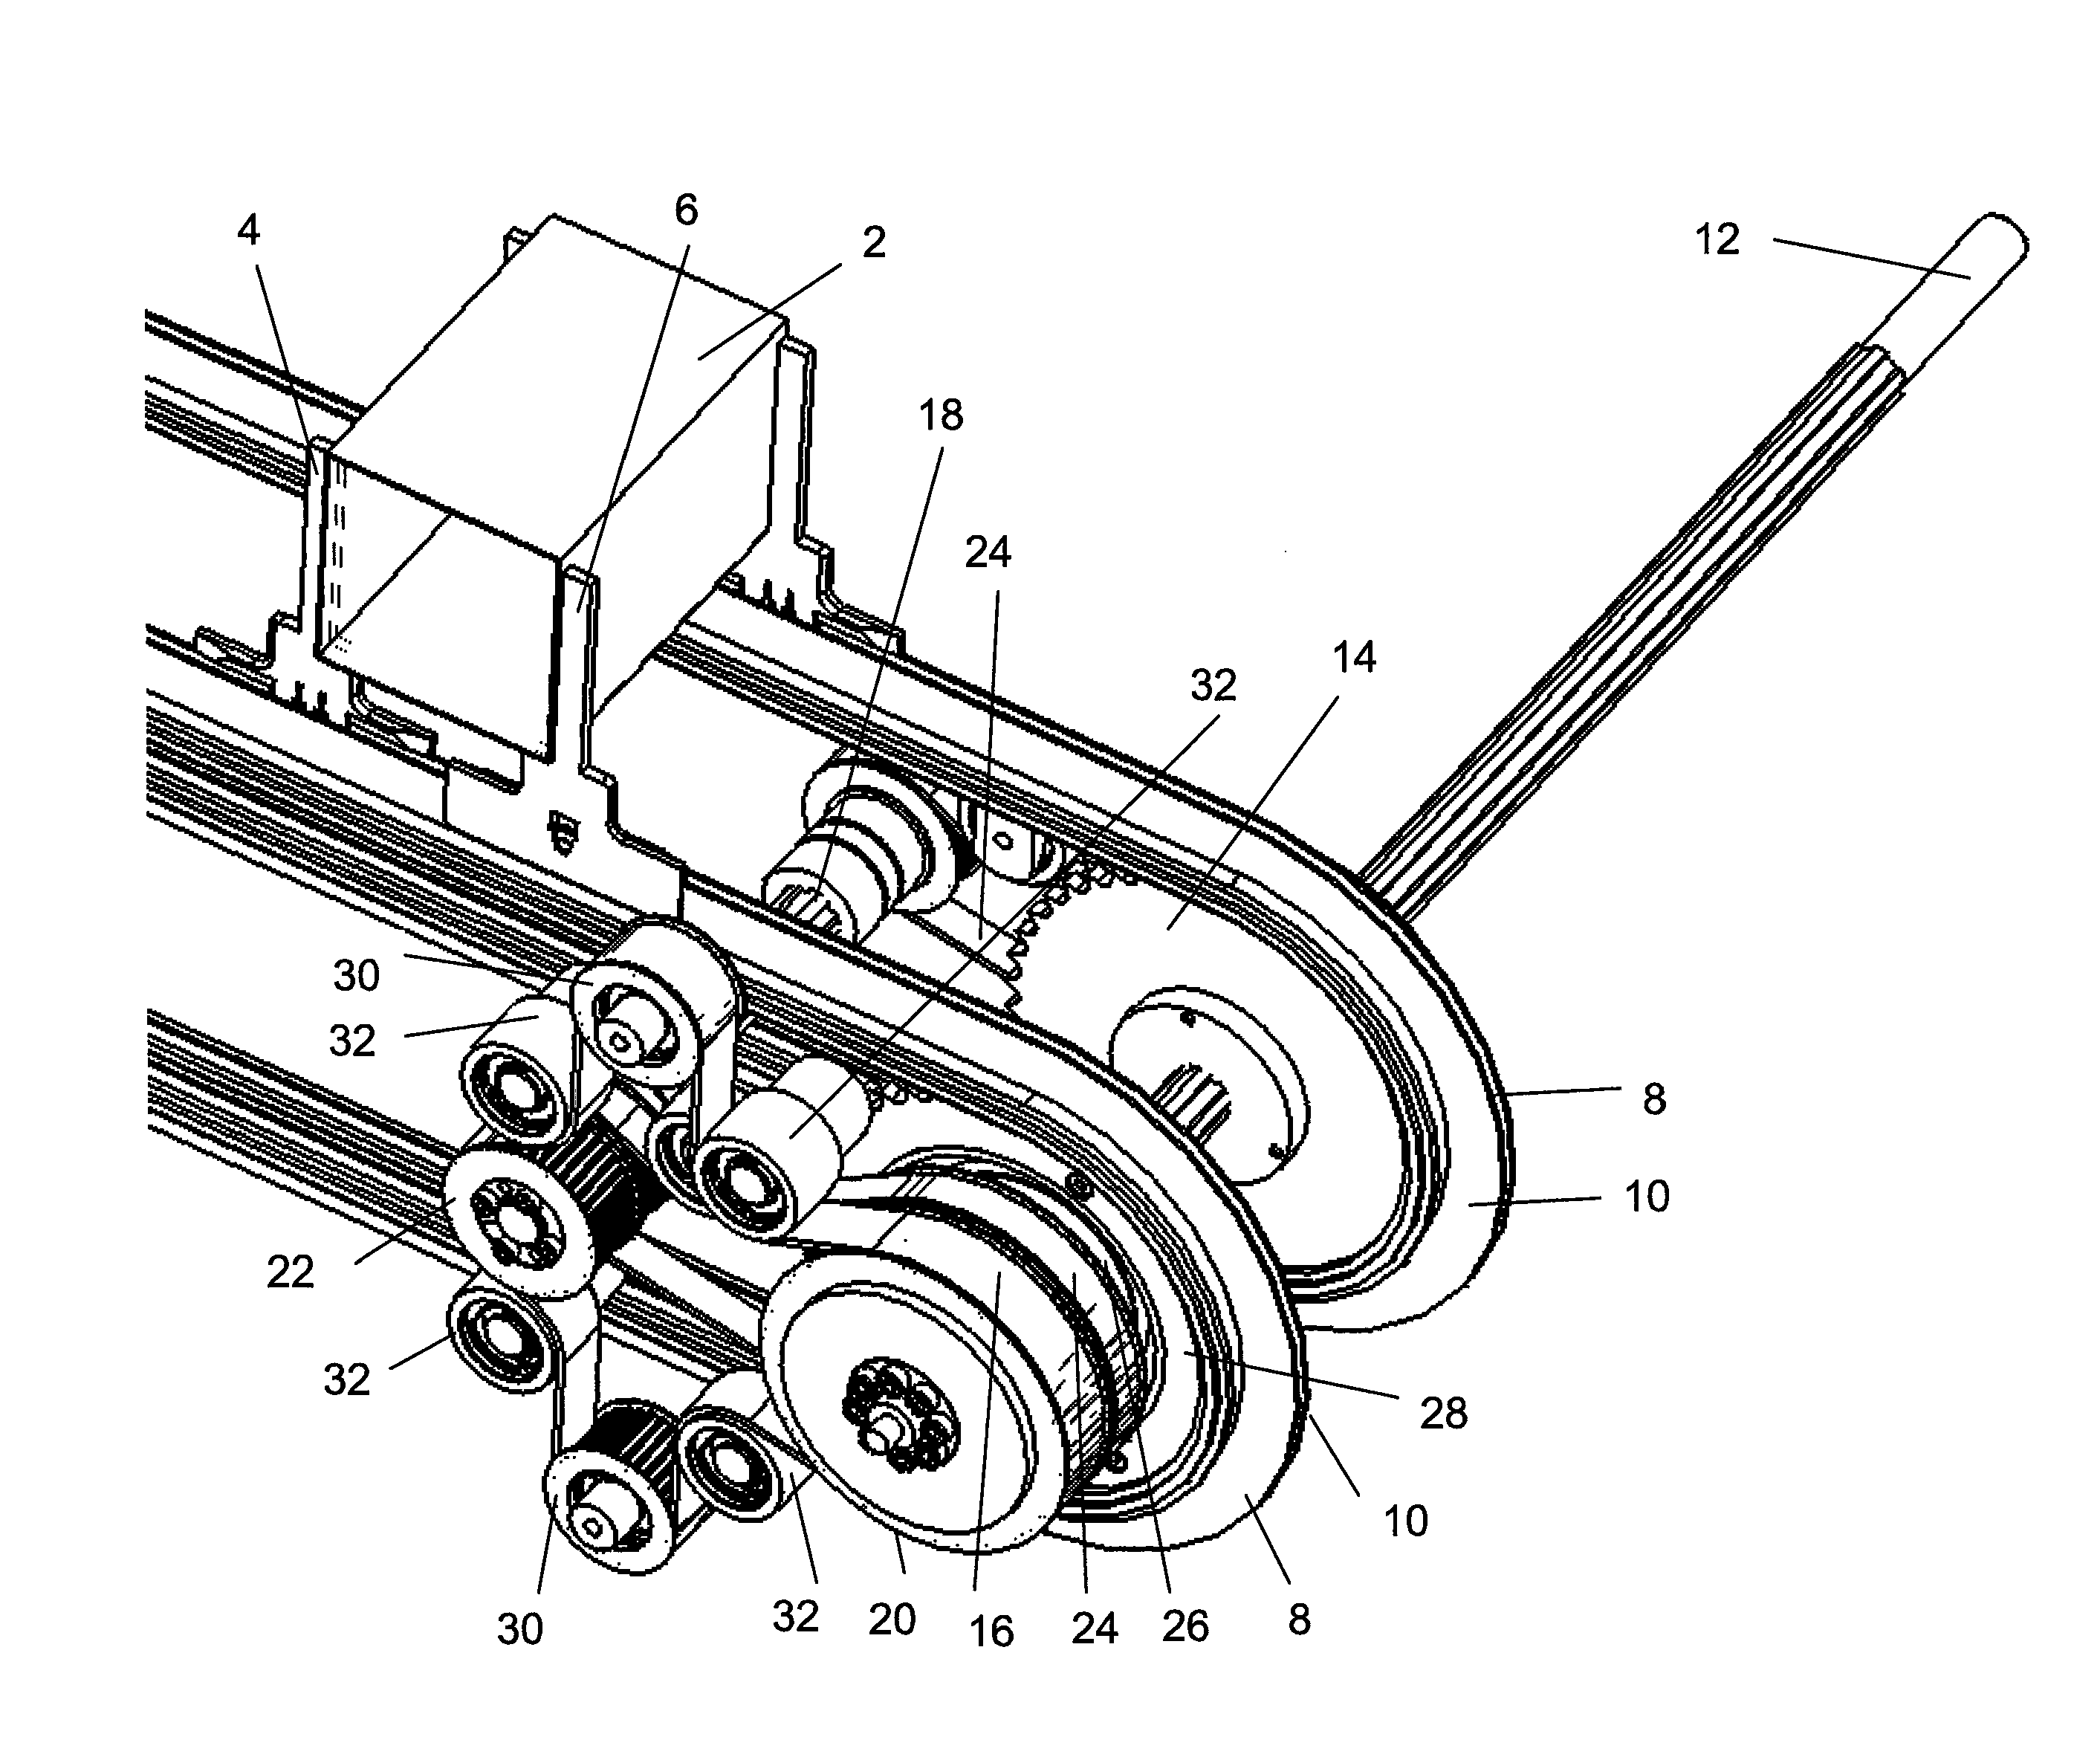 Device for conveying objects in packaging machines